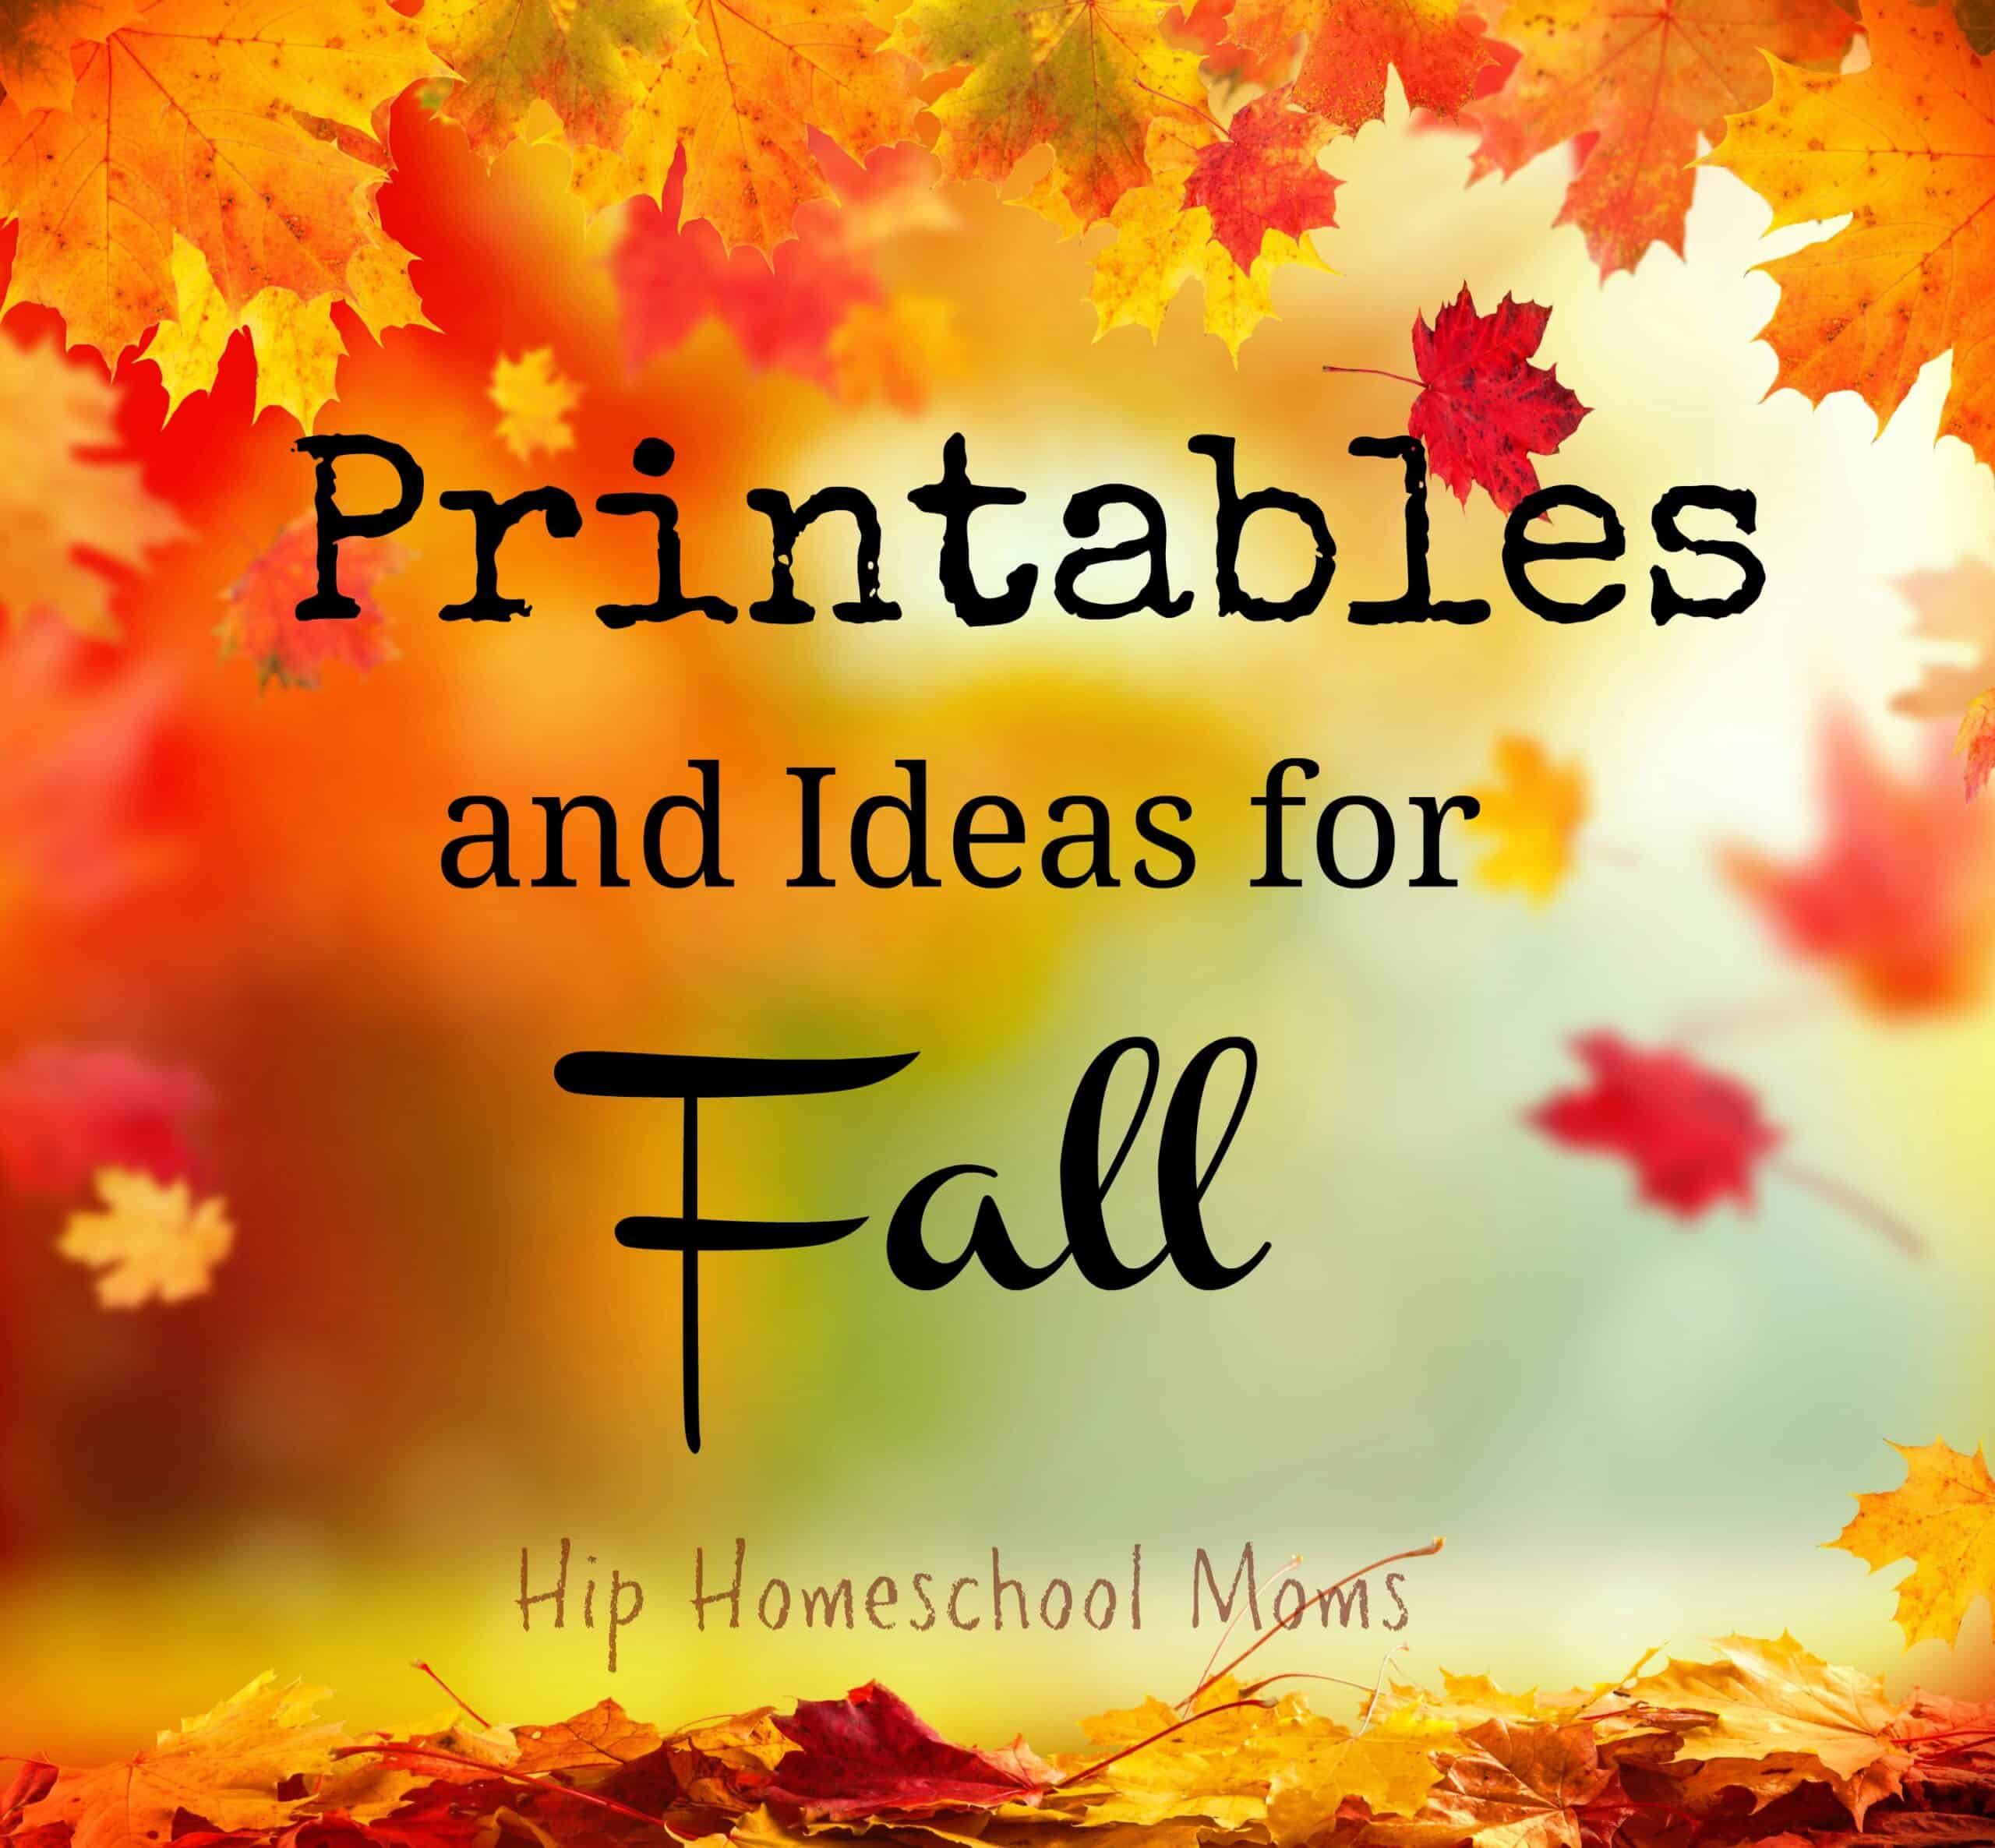 Printables and Ideas for Fall